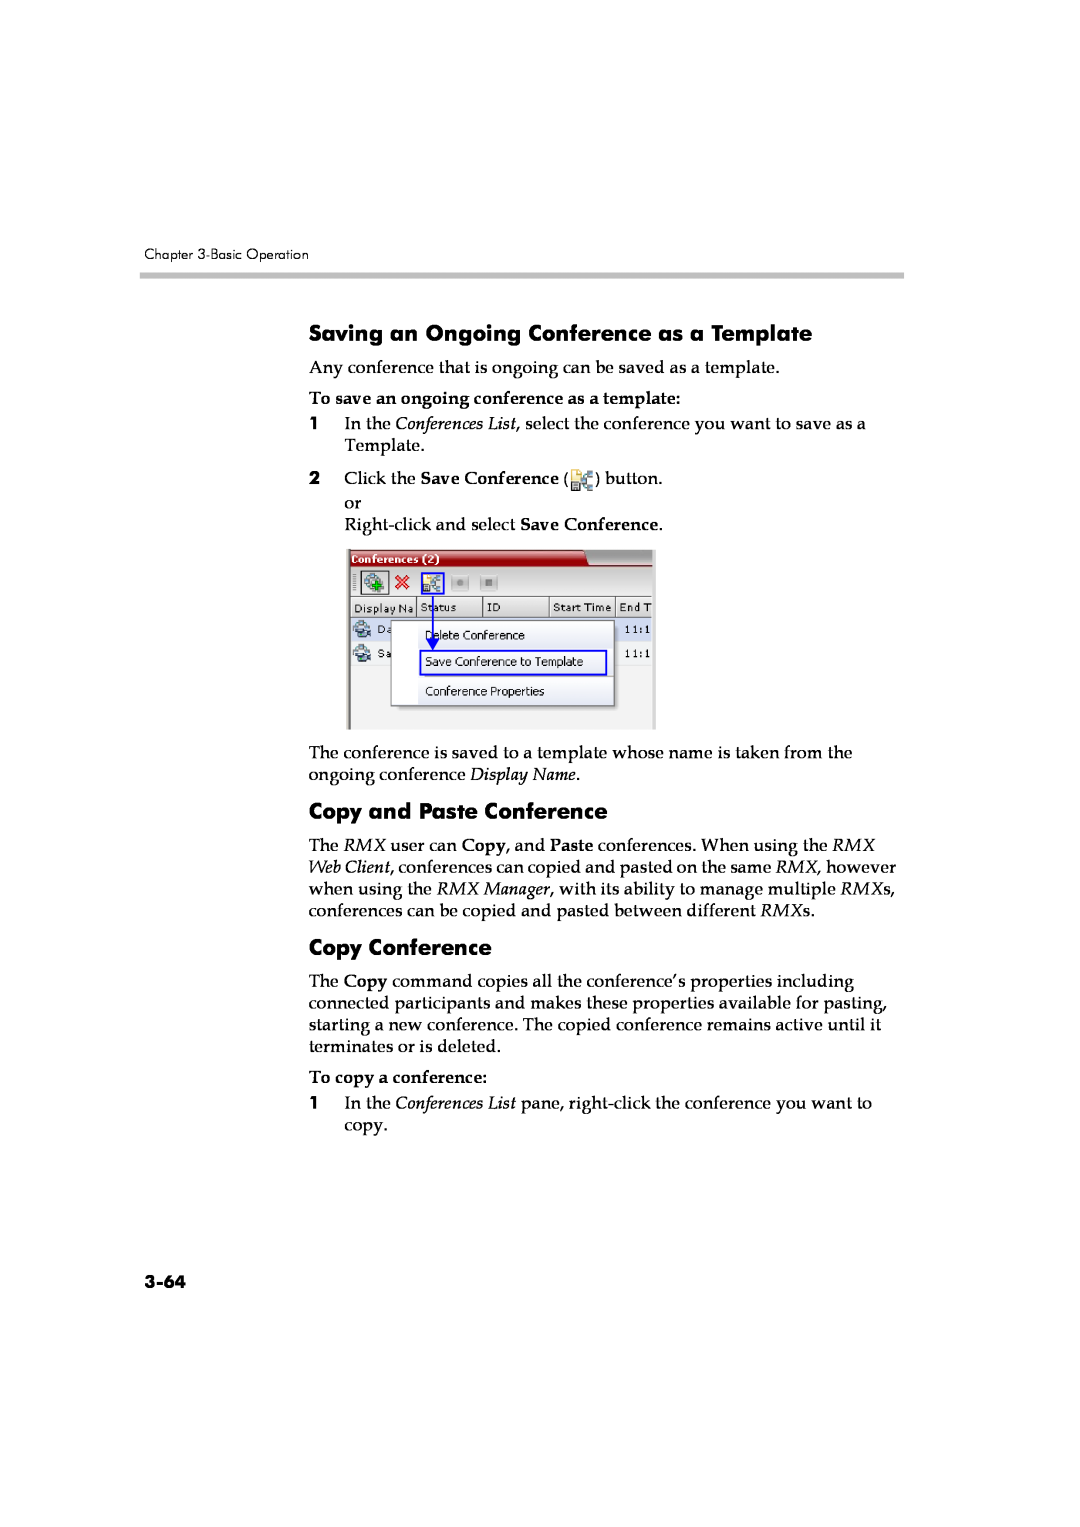 Polycom DOC2560B manual Saving an Ongoing Conference as a Template, Copy and Paste Conference, Copy Conference, 3-64 